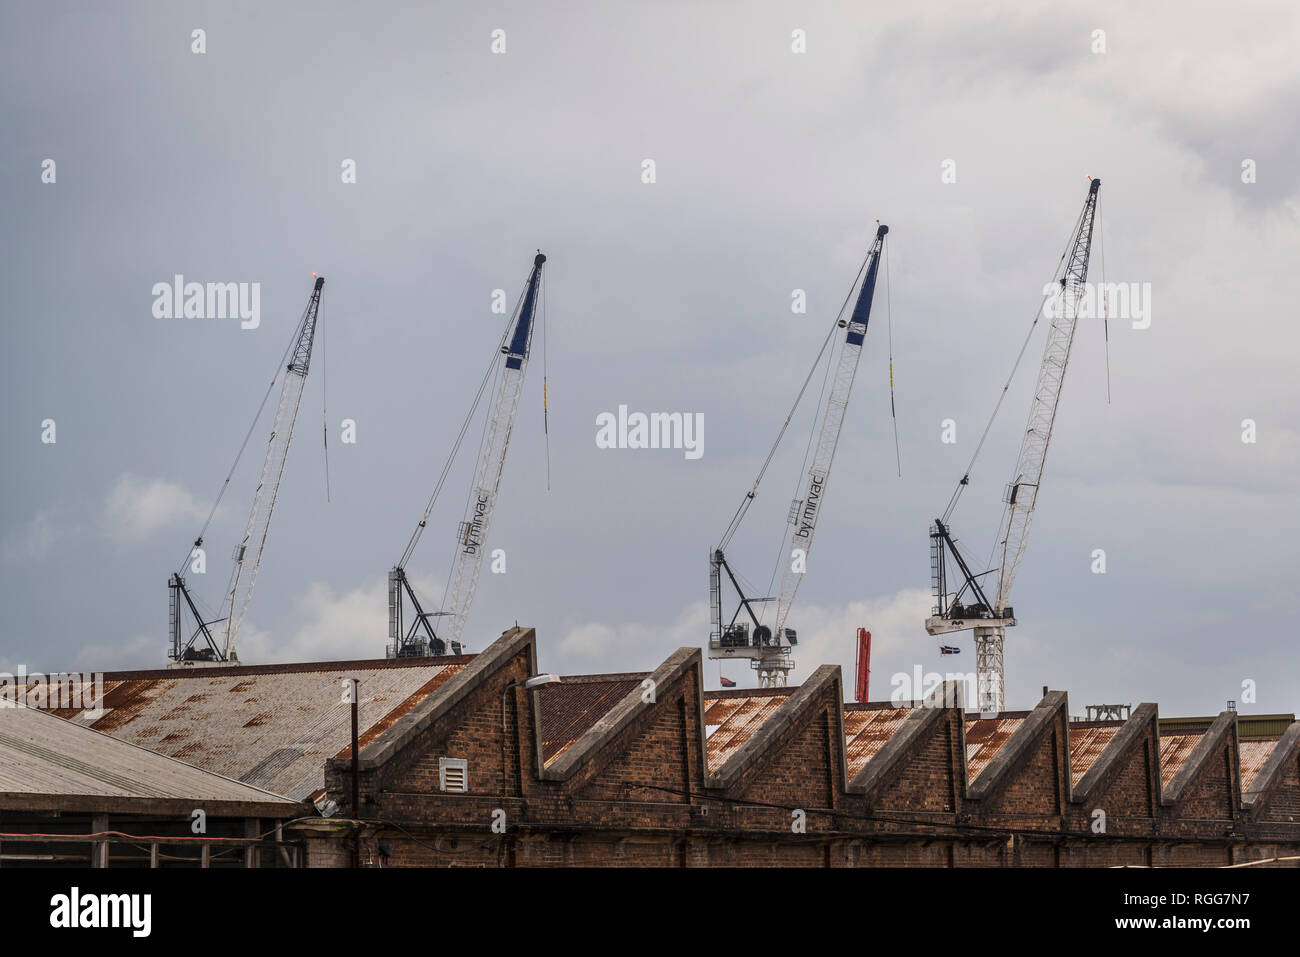 Old industrial depo building and cranes beyond it, Sydney, NSW, Australia Stock Photo